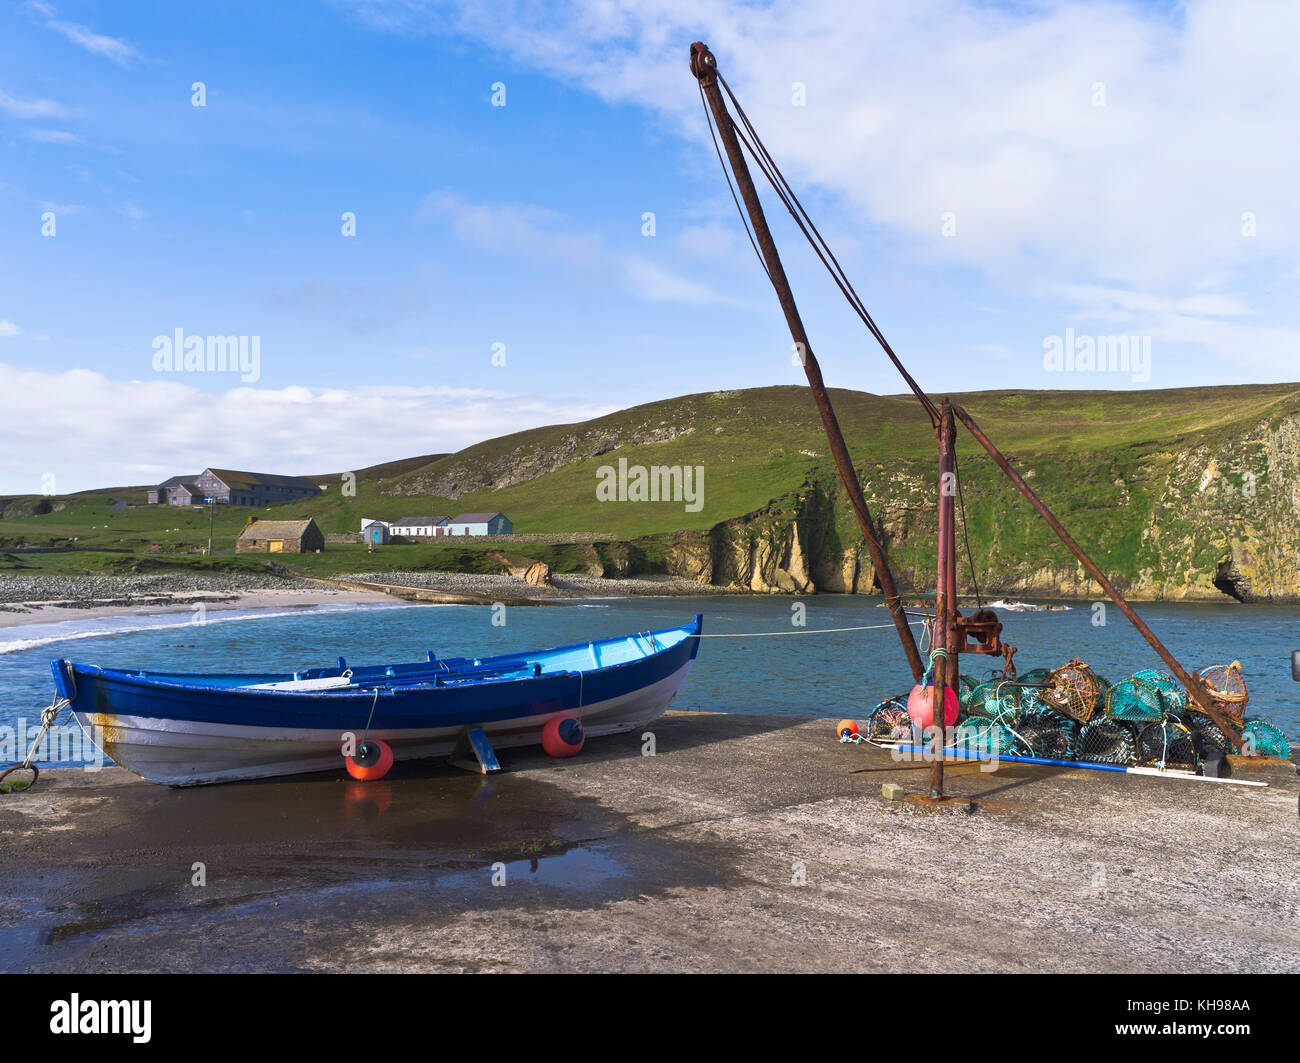 dh Harbour NORTH HAVEN FAIR ISLE Boat treuil traditionnel twin Prowed Yoal Skiff ecosse Banque D'Images